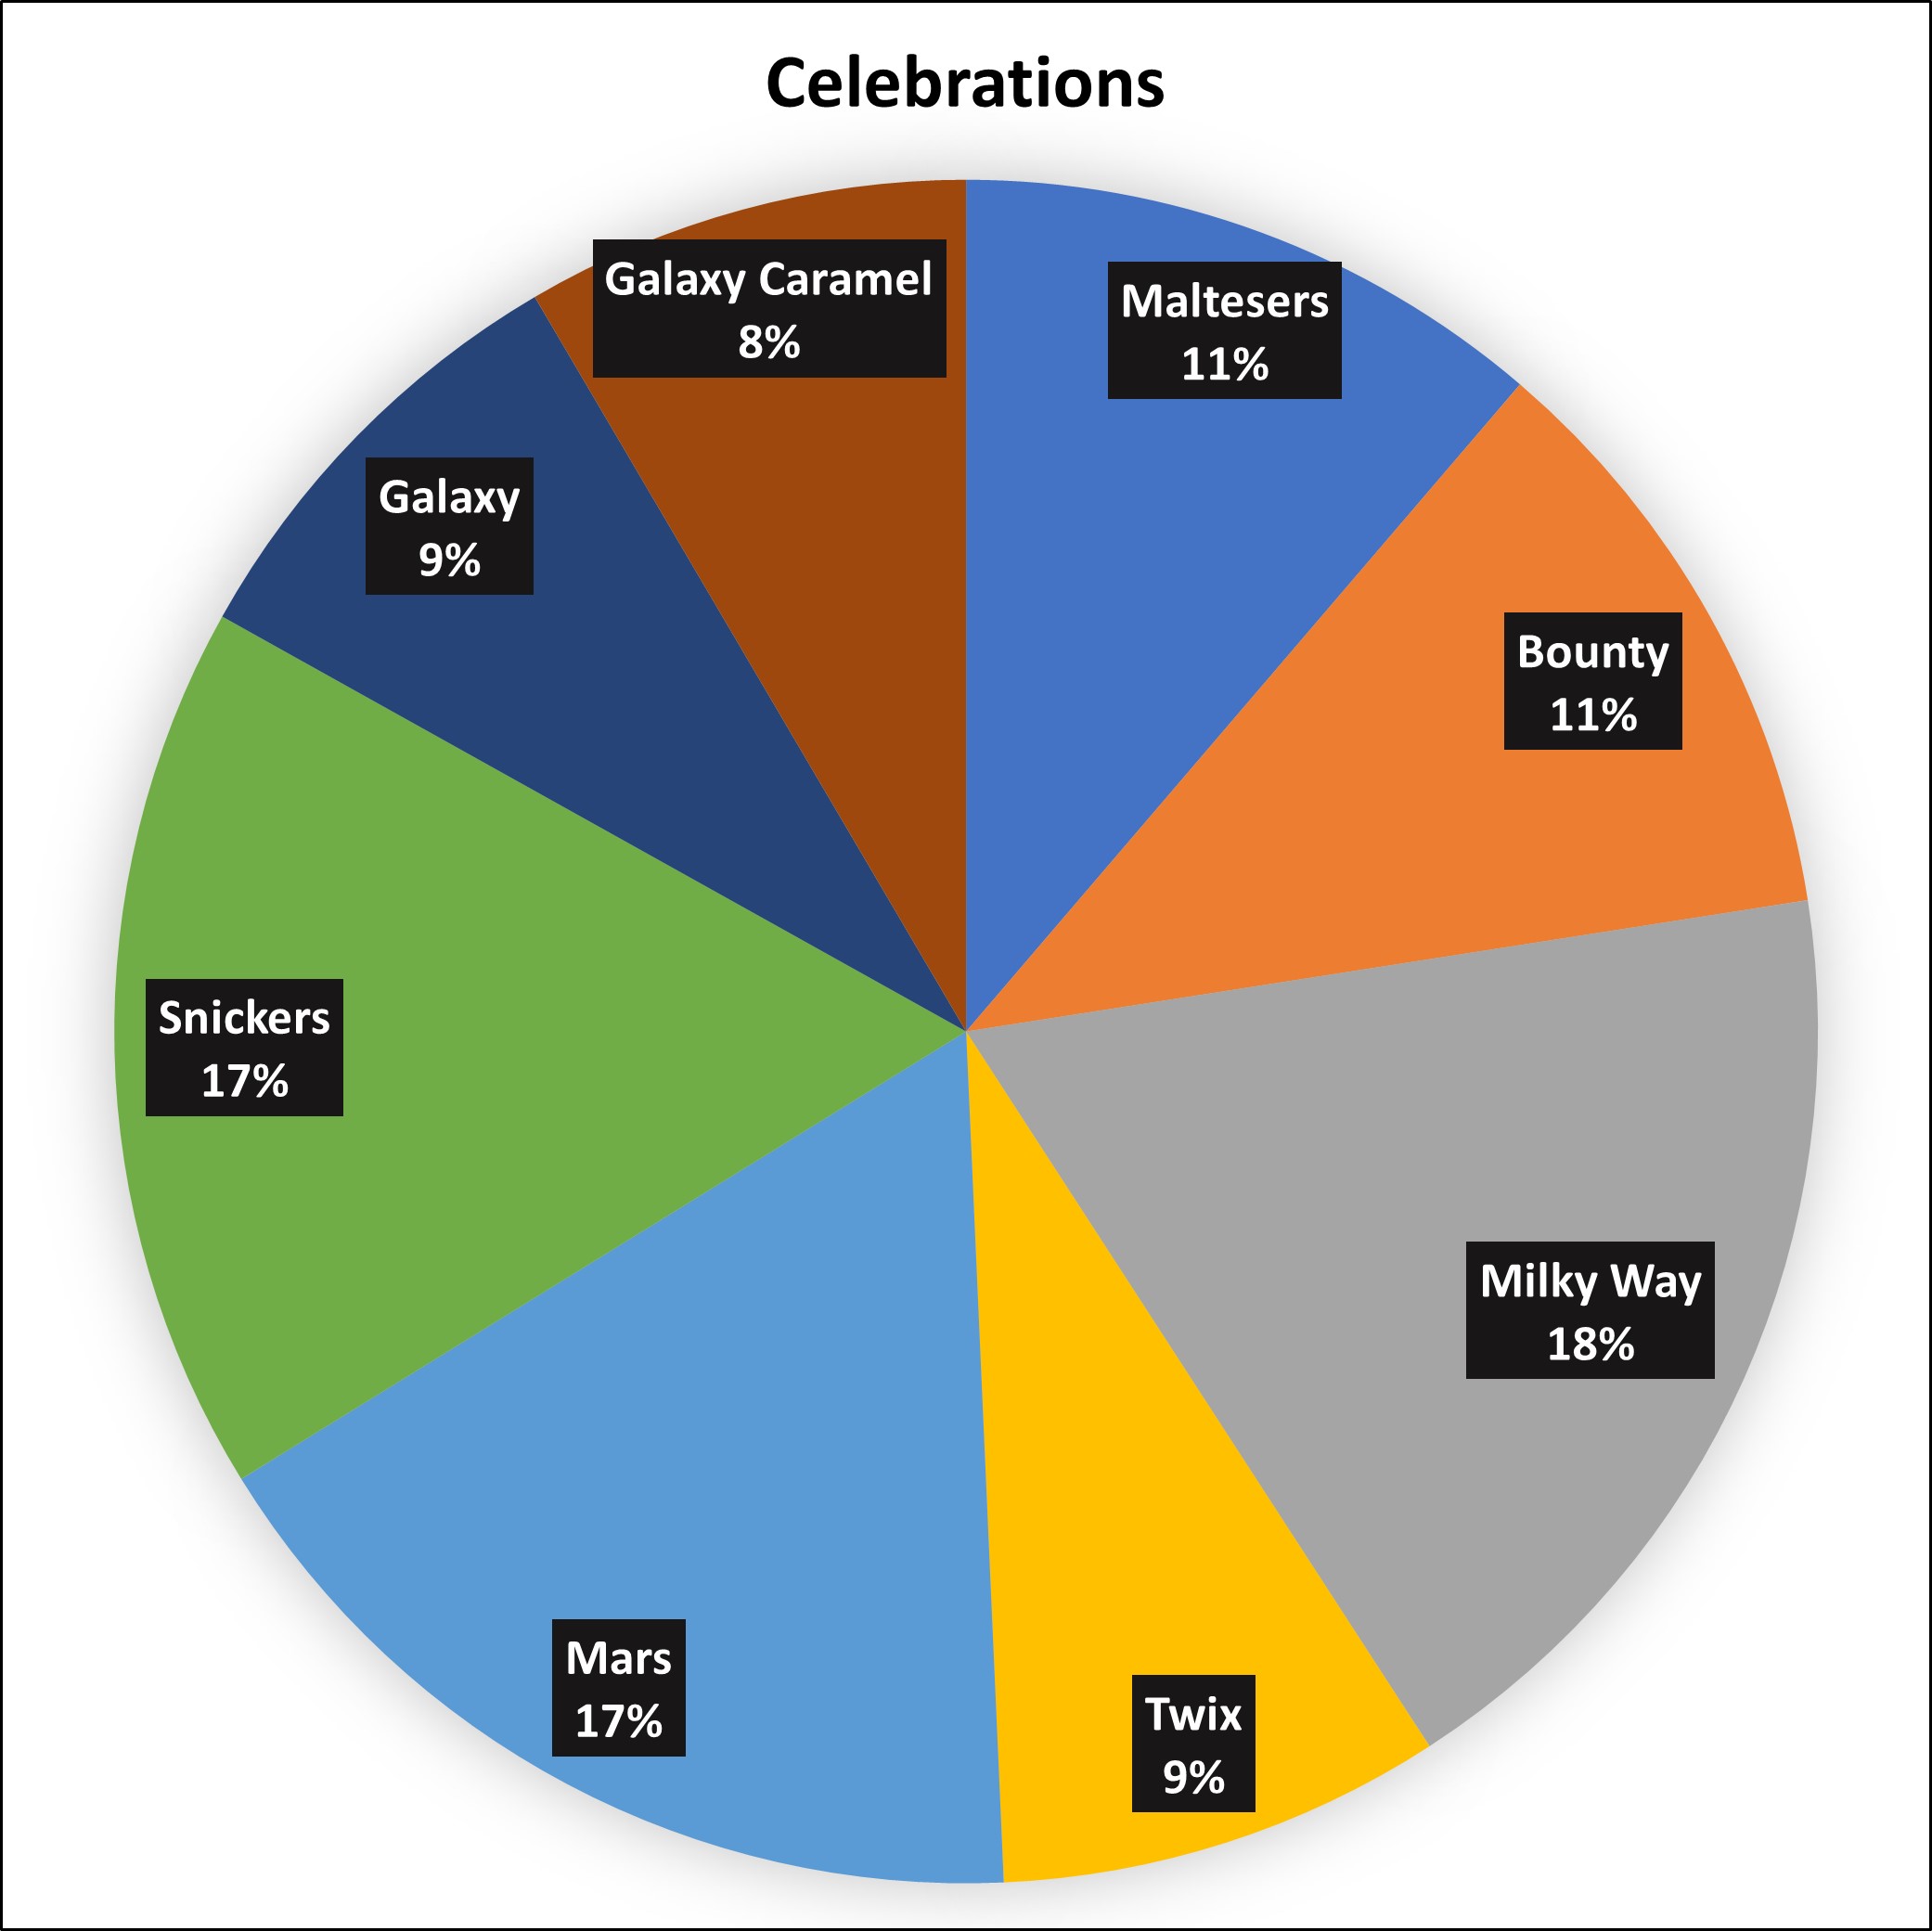 A pie chart showing the contents of a tin of Celebrations. It shows that the average box is made up of; 11% Maltesers, 11% Bounty, 18% Milky Way, 9% Twix, 17% Mars, 17% Snickers, 9% Galaxy, 8% Galaxy Caramel.